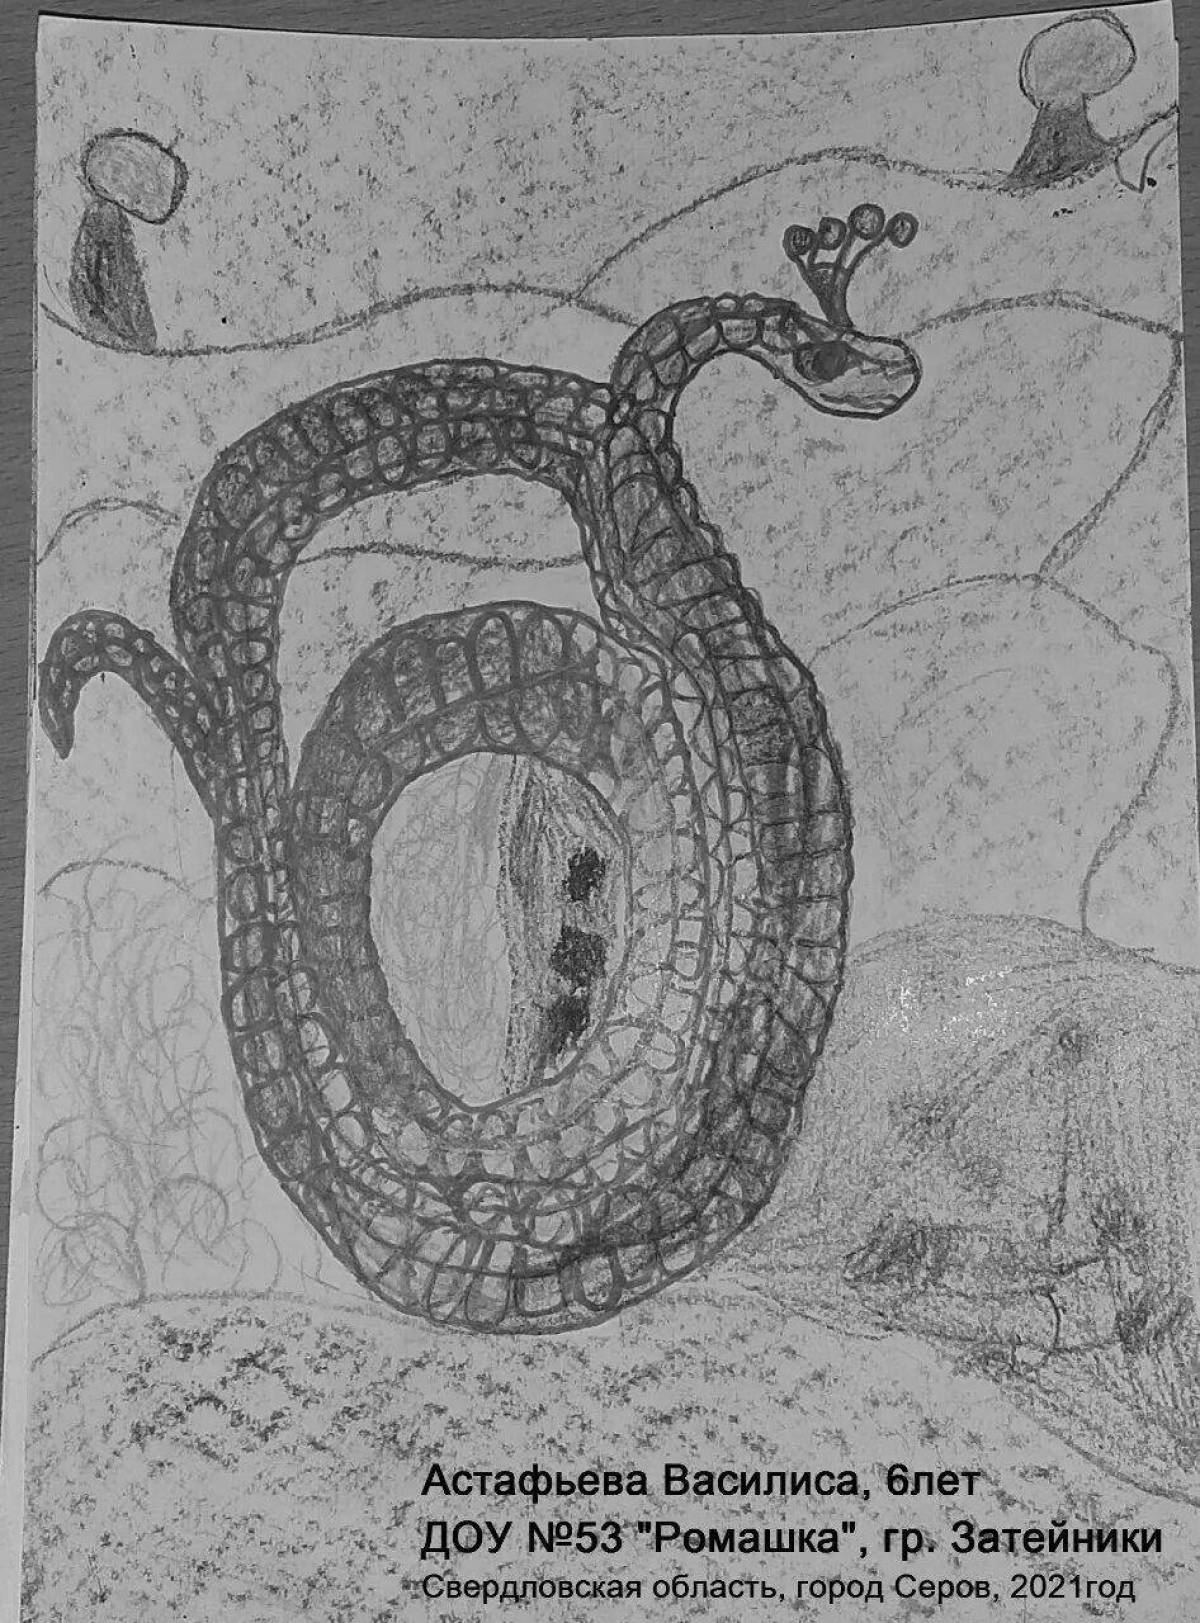 Coloring page gorgeous budge blue snake